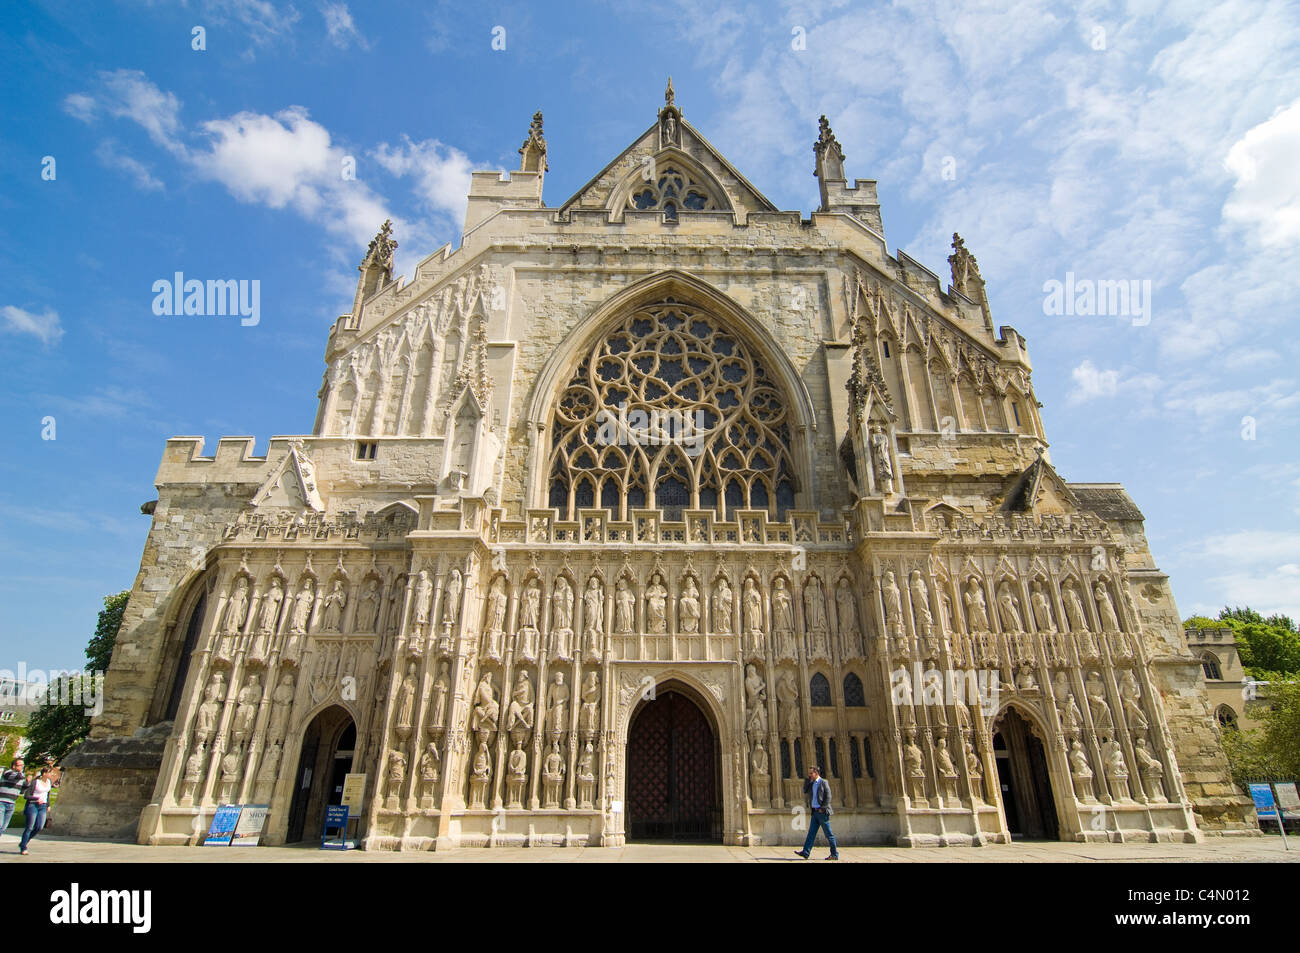 Horizontal wide angle view of the impressive west front of Exeter Cathedral after redevelopment work, on a sunny day. Stock Photo